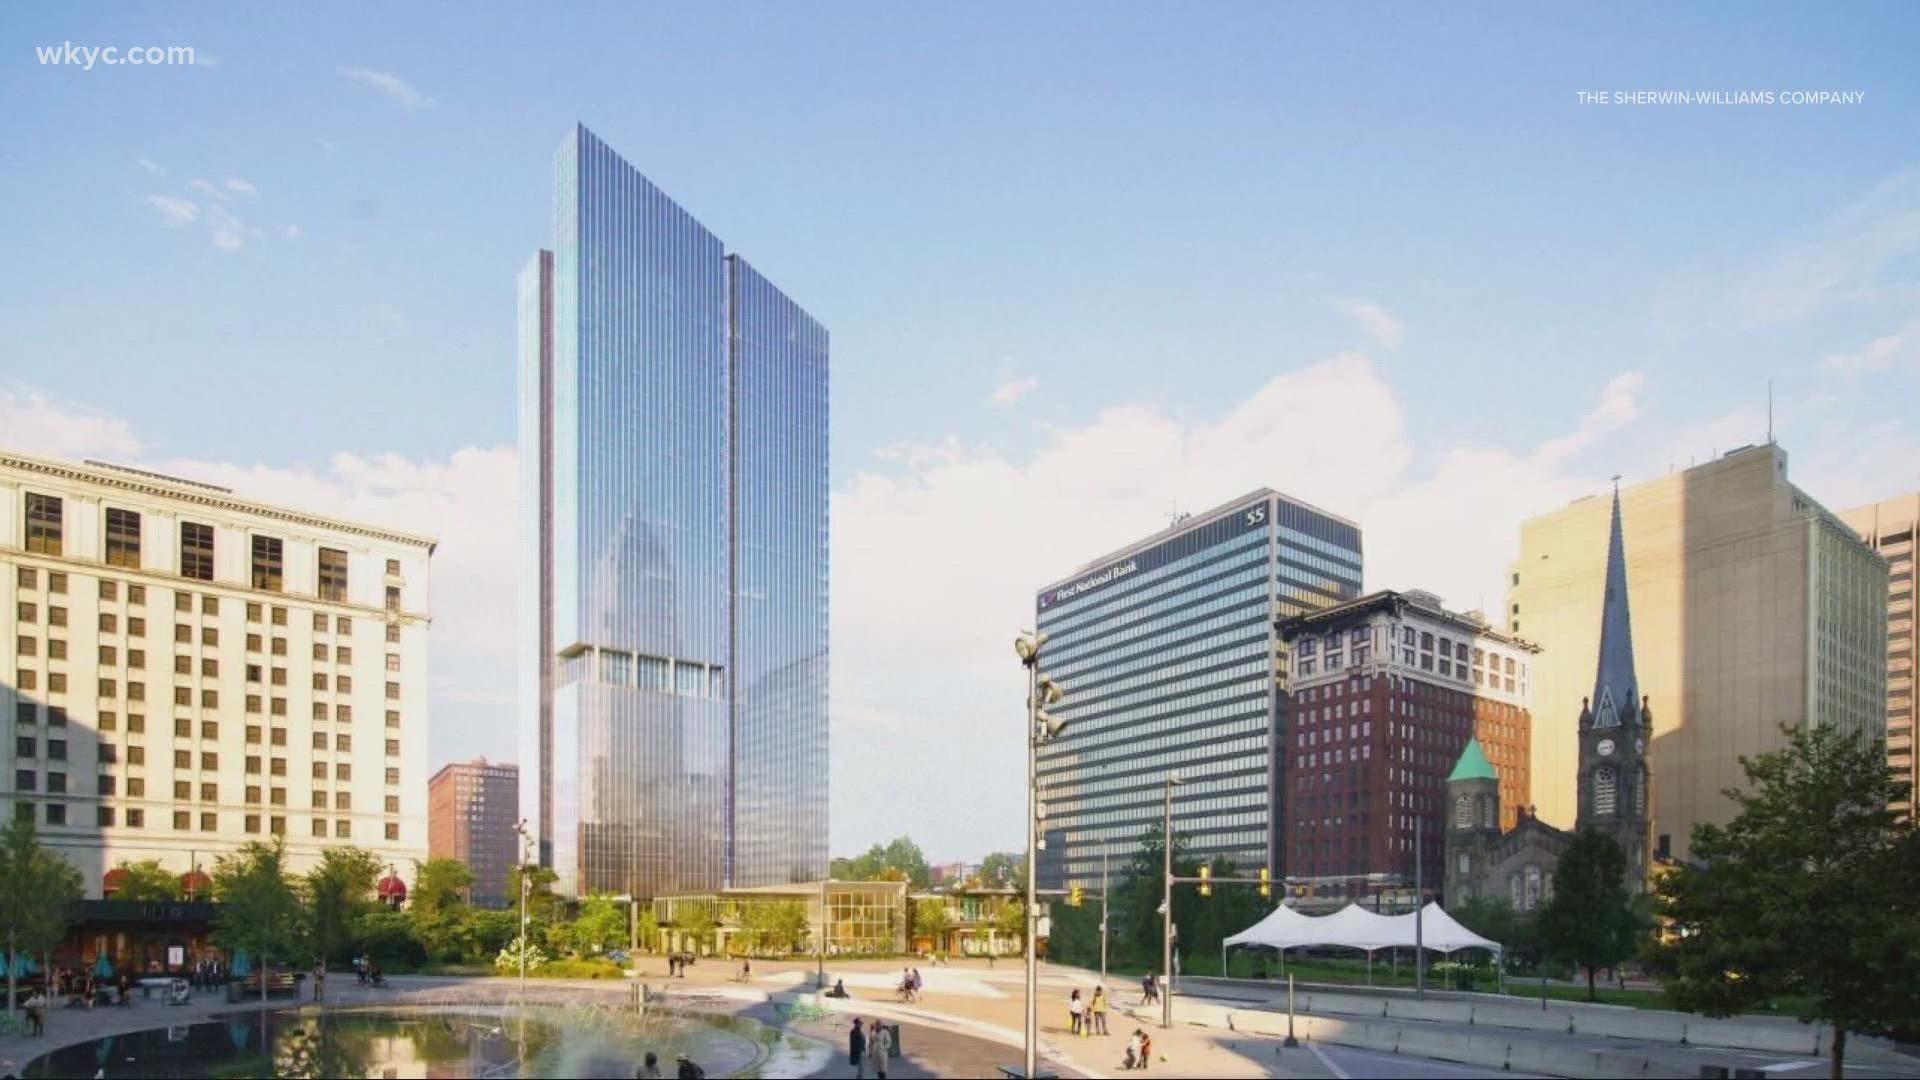 Groundbreaking for Sherwin-Williams' global headquarters is expected to take place before the end of this year, with completion scheduled for late 2024.